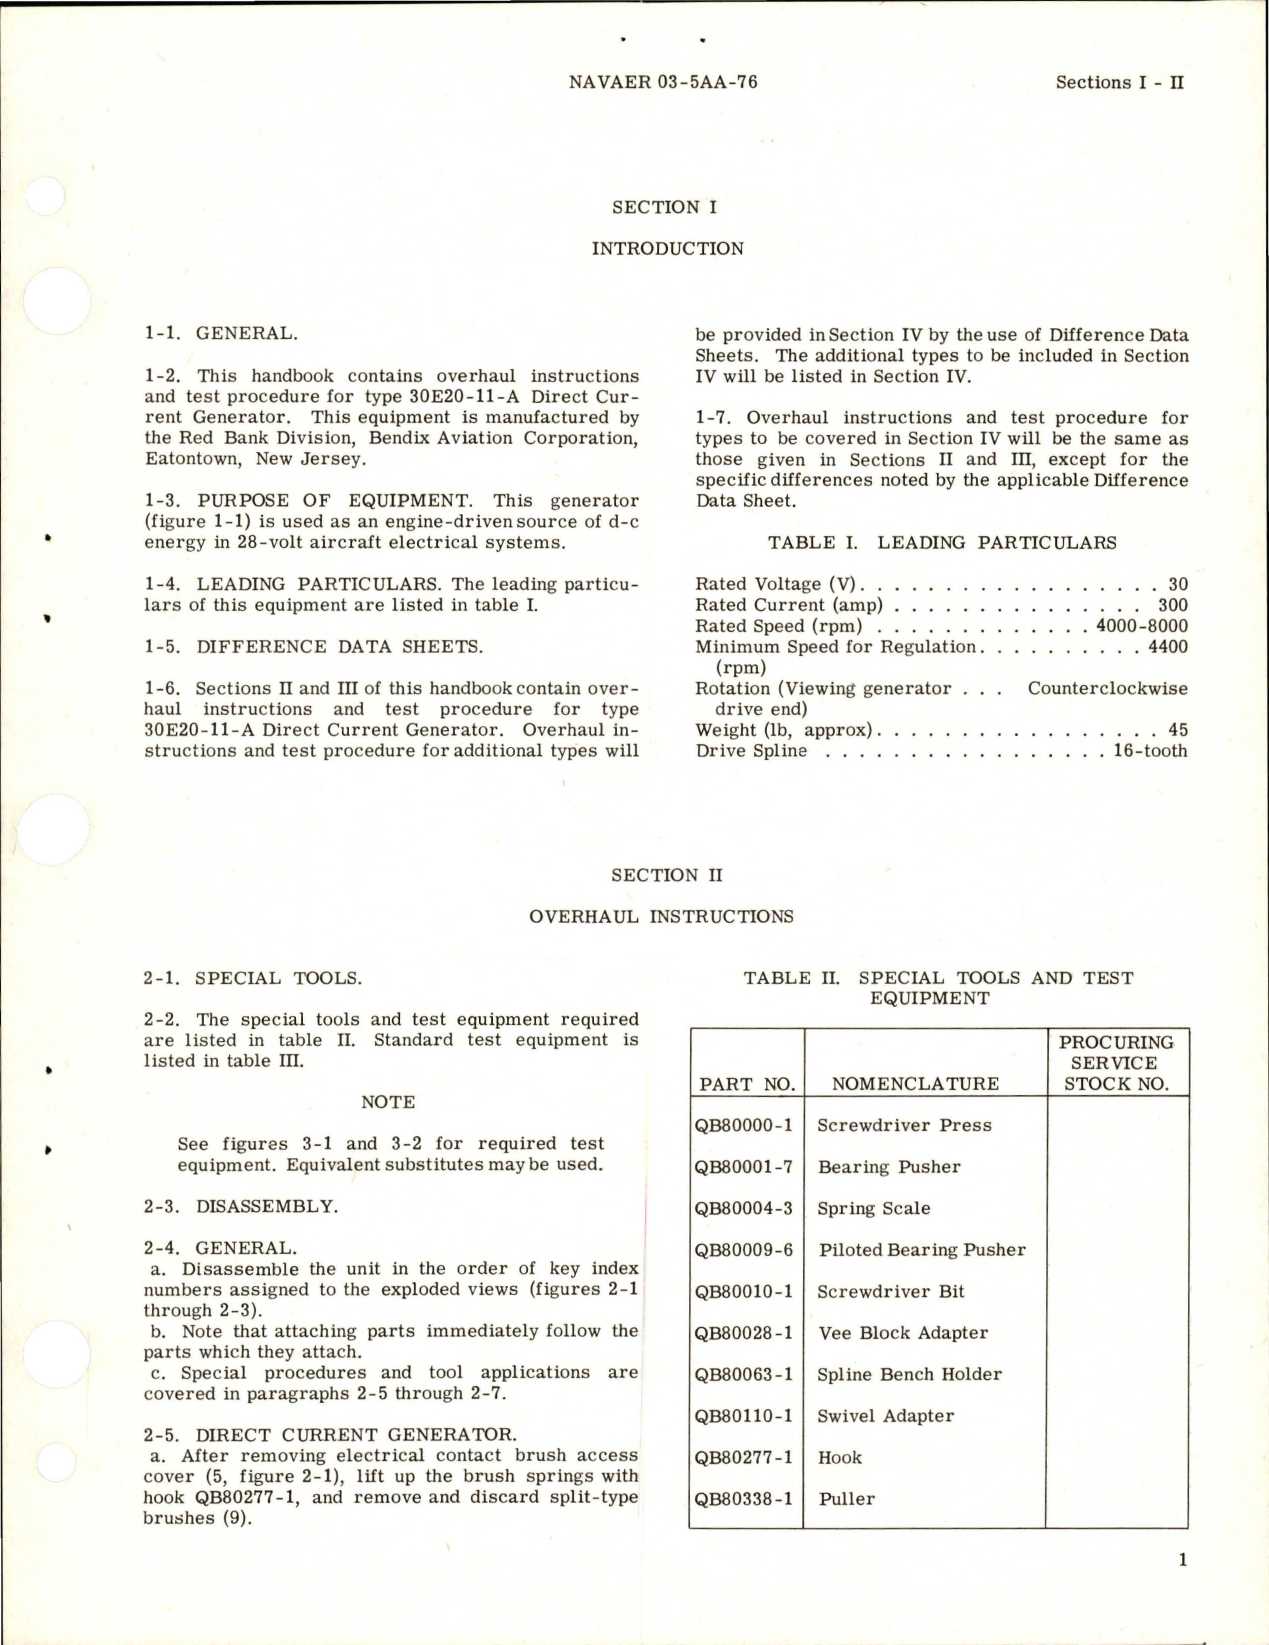 Sample page 5 from AirCorps Library document: Overhaul Instructions for Direct Current Generator - Type 30E20-11-A